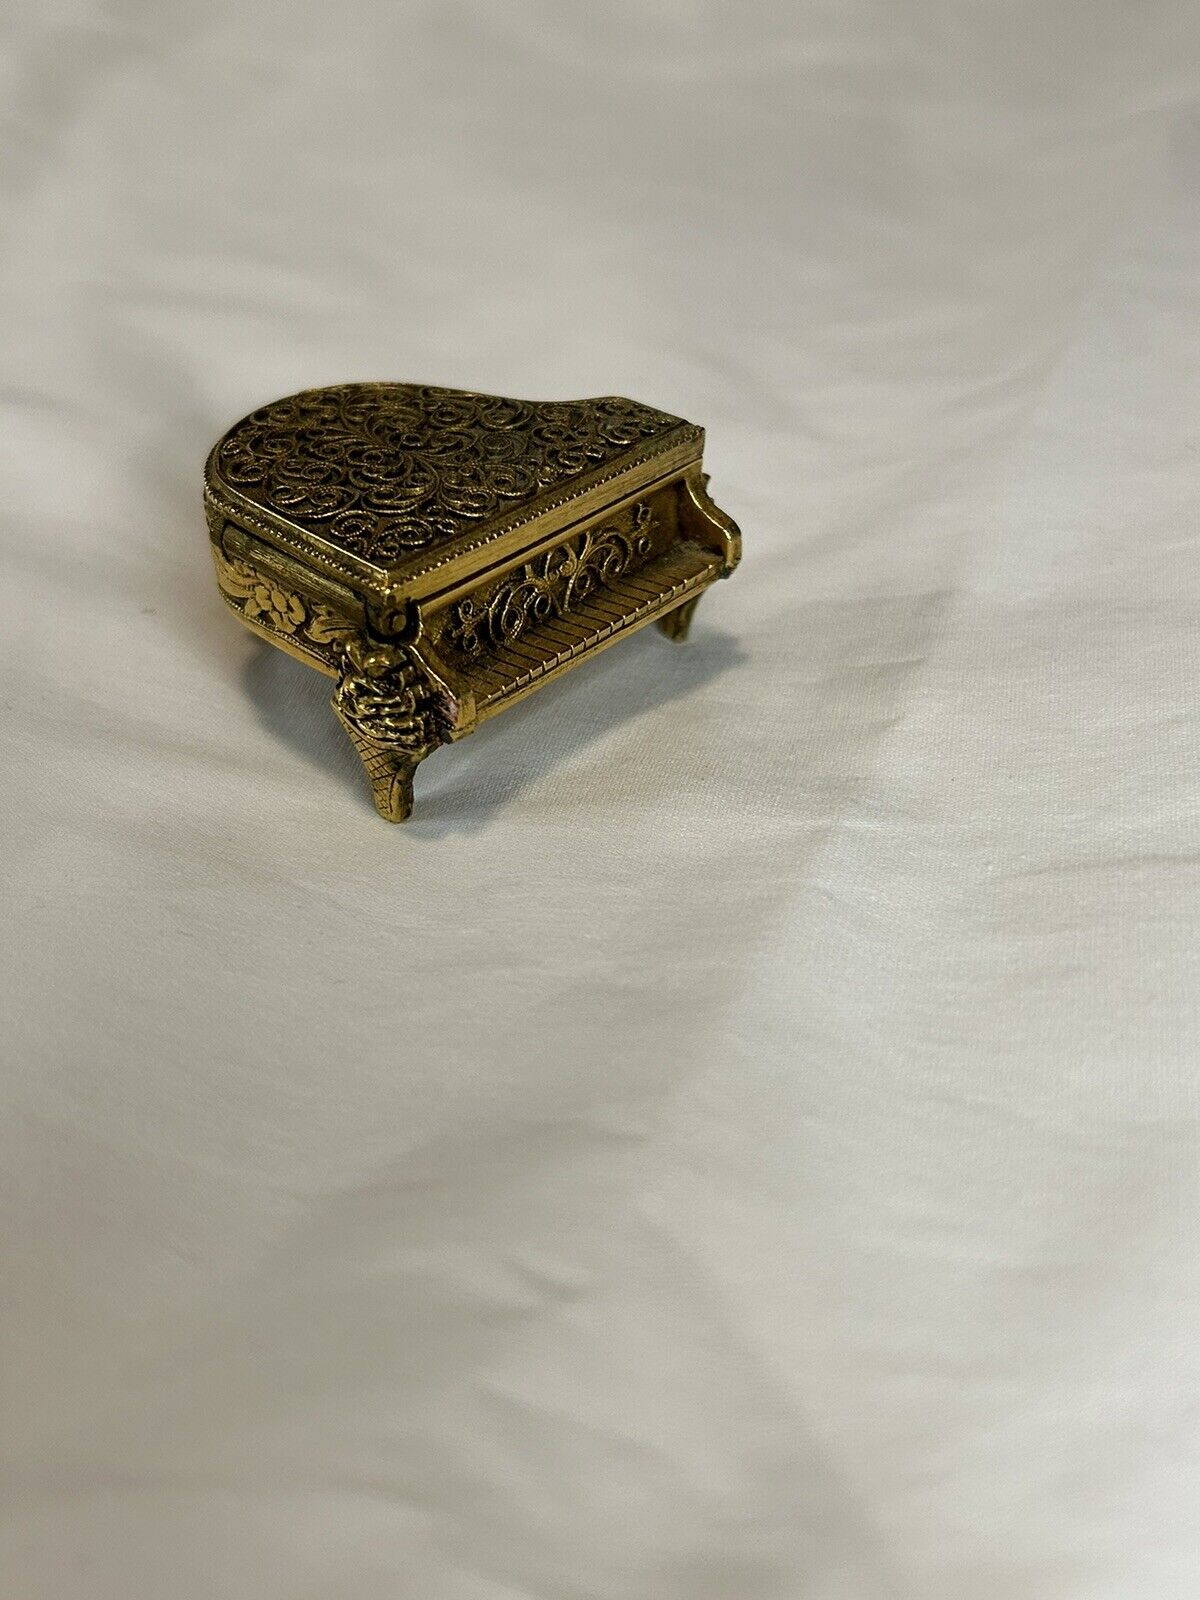 VTG Avon Golden Embossed Baby Grand Piano Ornate Solid Perfume Container Box